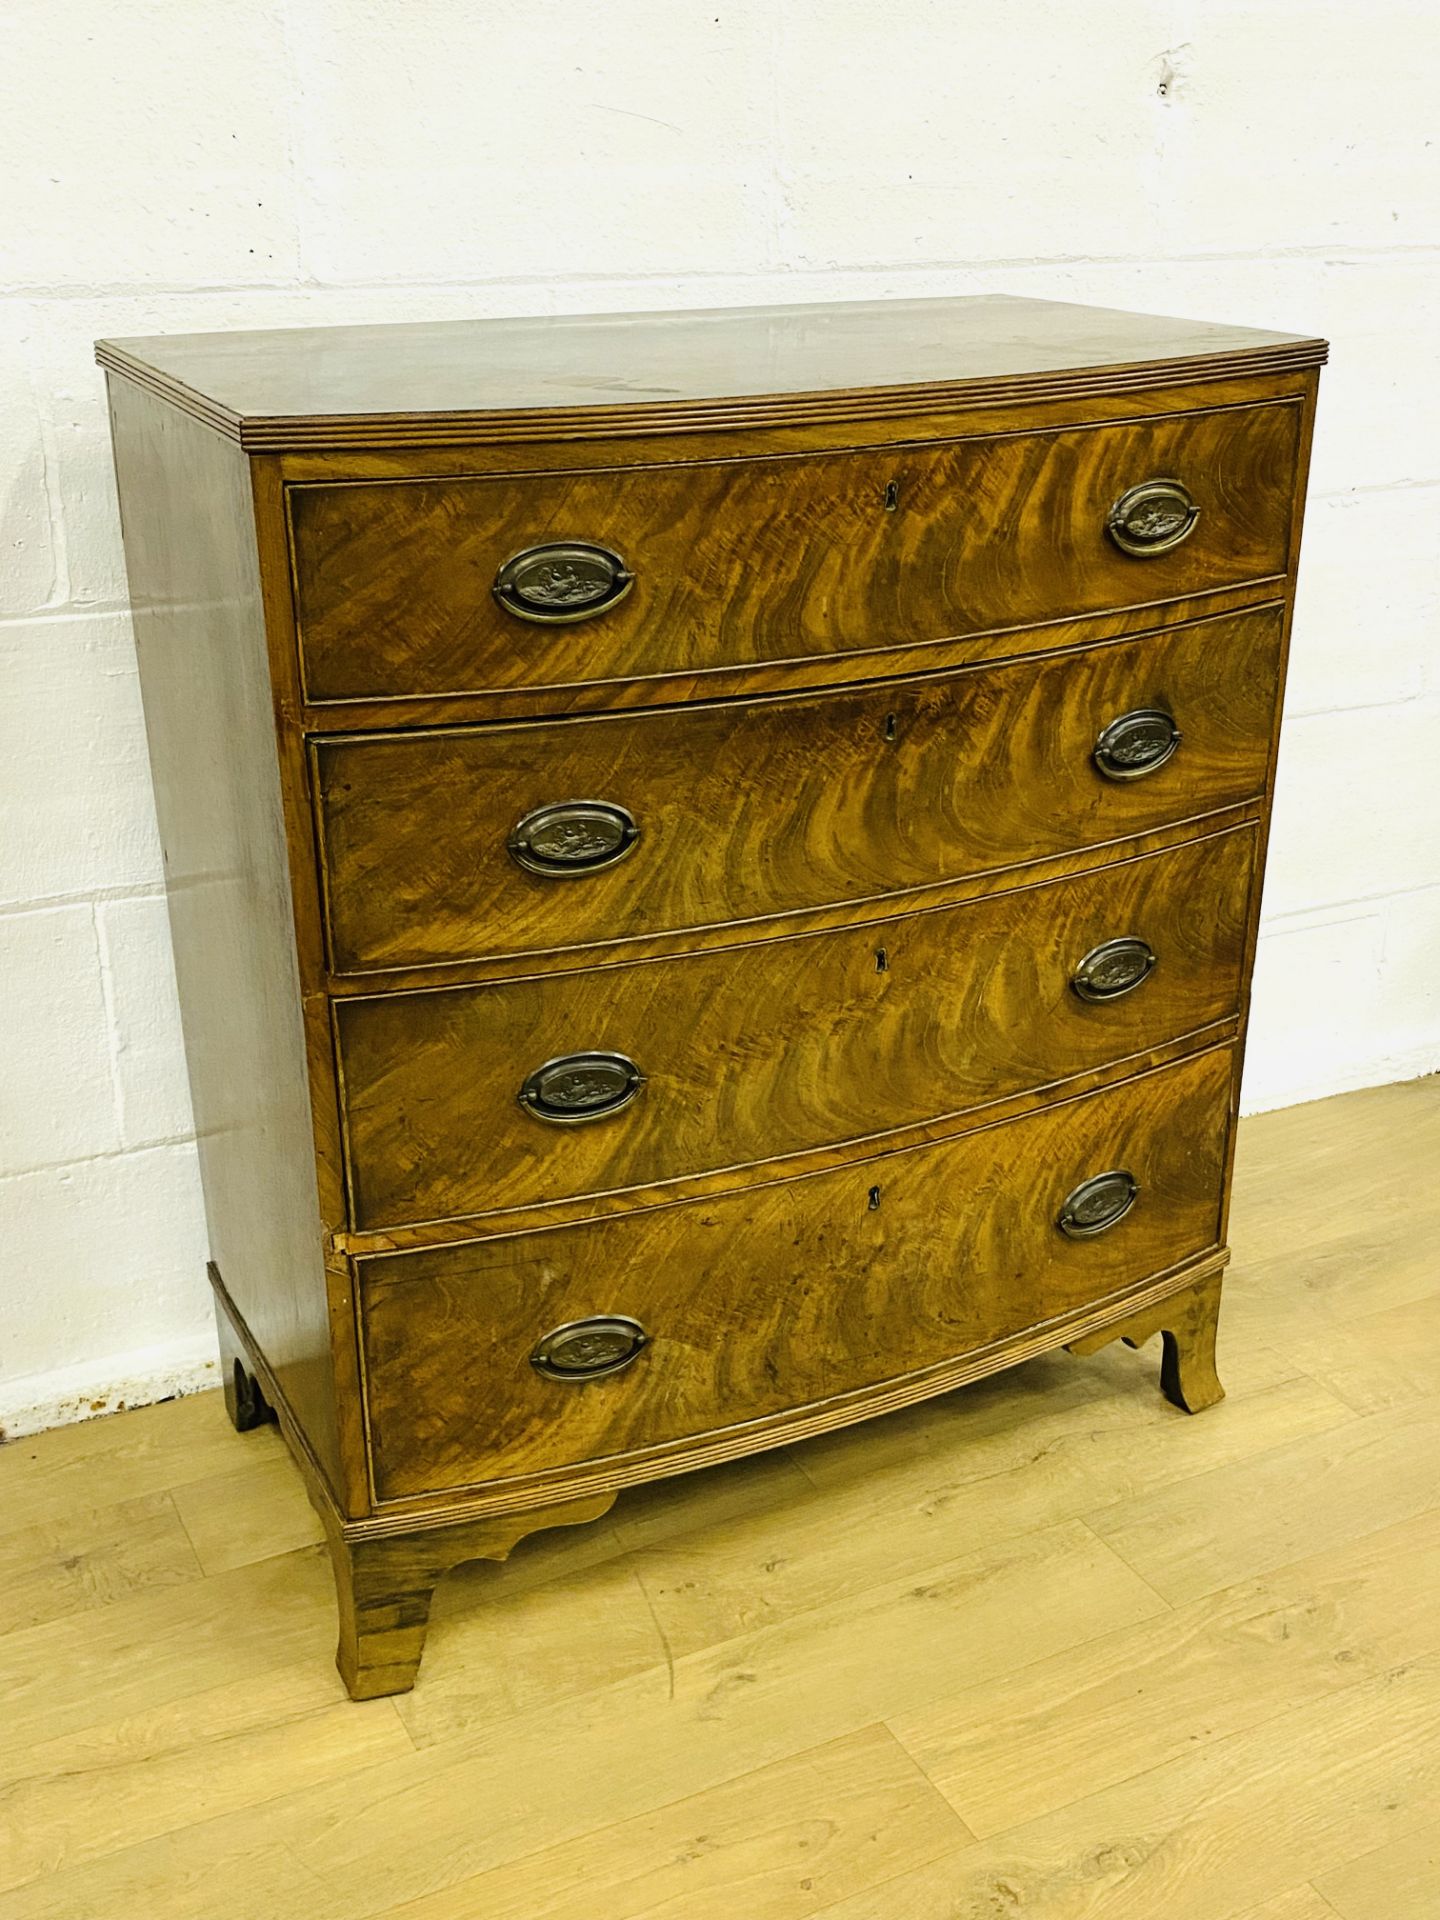 Bow fronted chest of drawers - Image 4 of 8